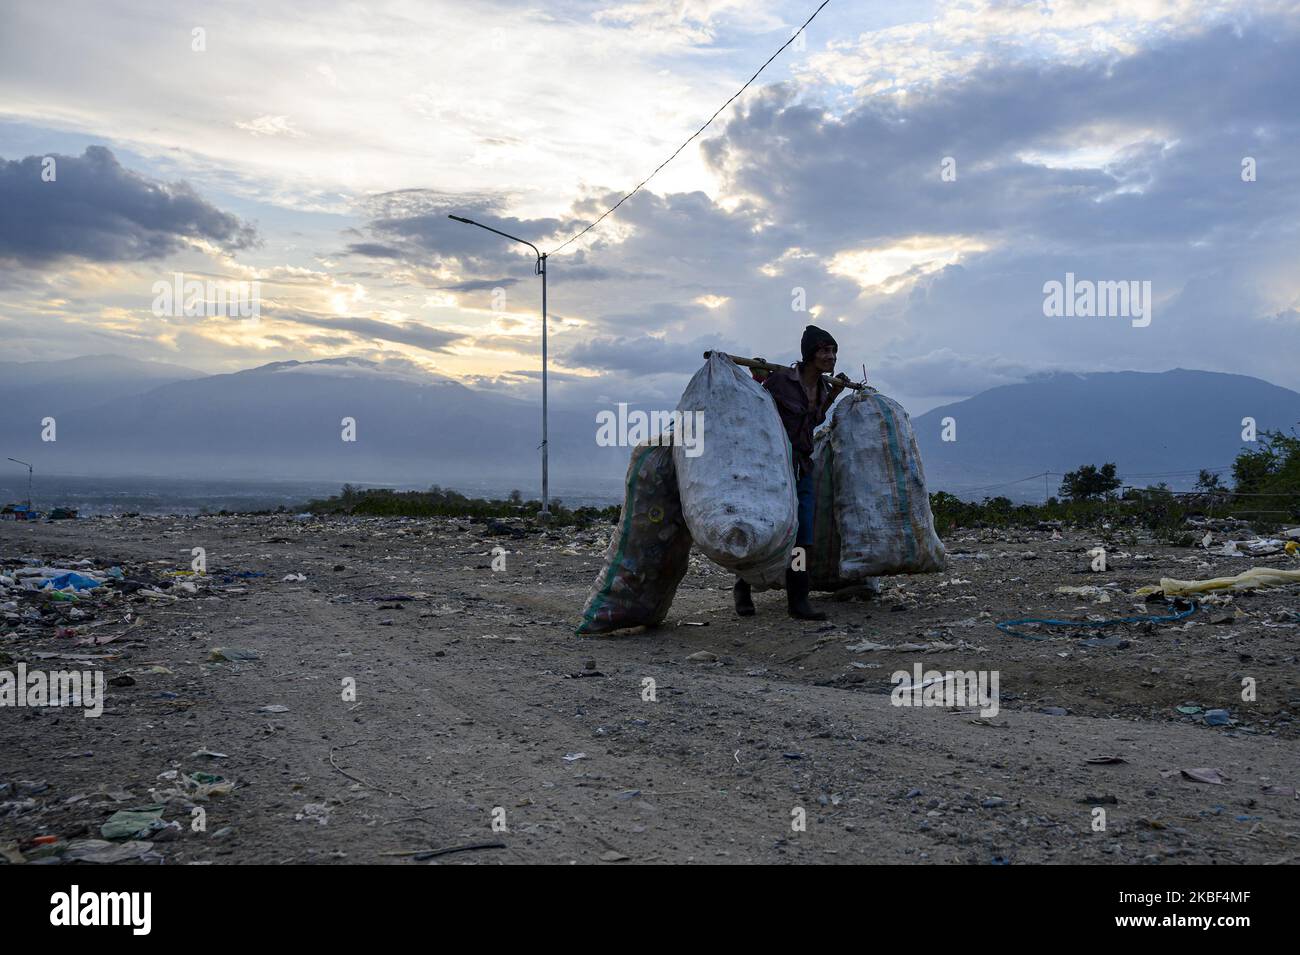 A scavenger carries plastic waste that has been collected for recycling at the Kawatuna landfill, Palu, Central Sulawesi, Indonesia on January 22, 2020. The economic potential for recycling plastic waste is huge because based on the results of an environmental audit by Greenpeace in 2019, only 9 percent of the waste plastic is recycled, 12 percent is burned and 79 percent ends up in landfills and waterways like rivers that run into the ocean. Indonesia is the second largest waste producer in the world after China. (Photo by Basri Marzuki/NurPhoto) Stock Photo